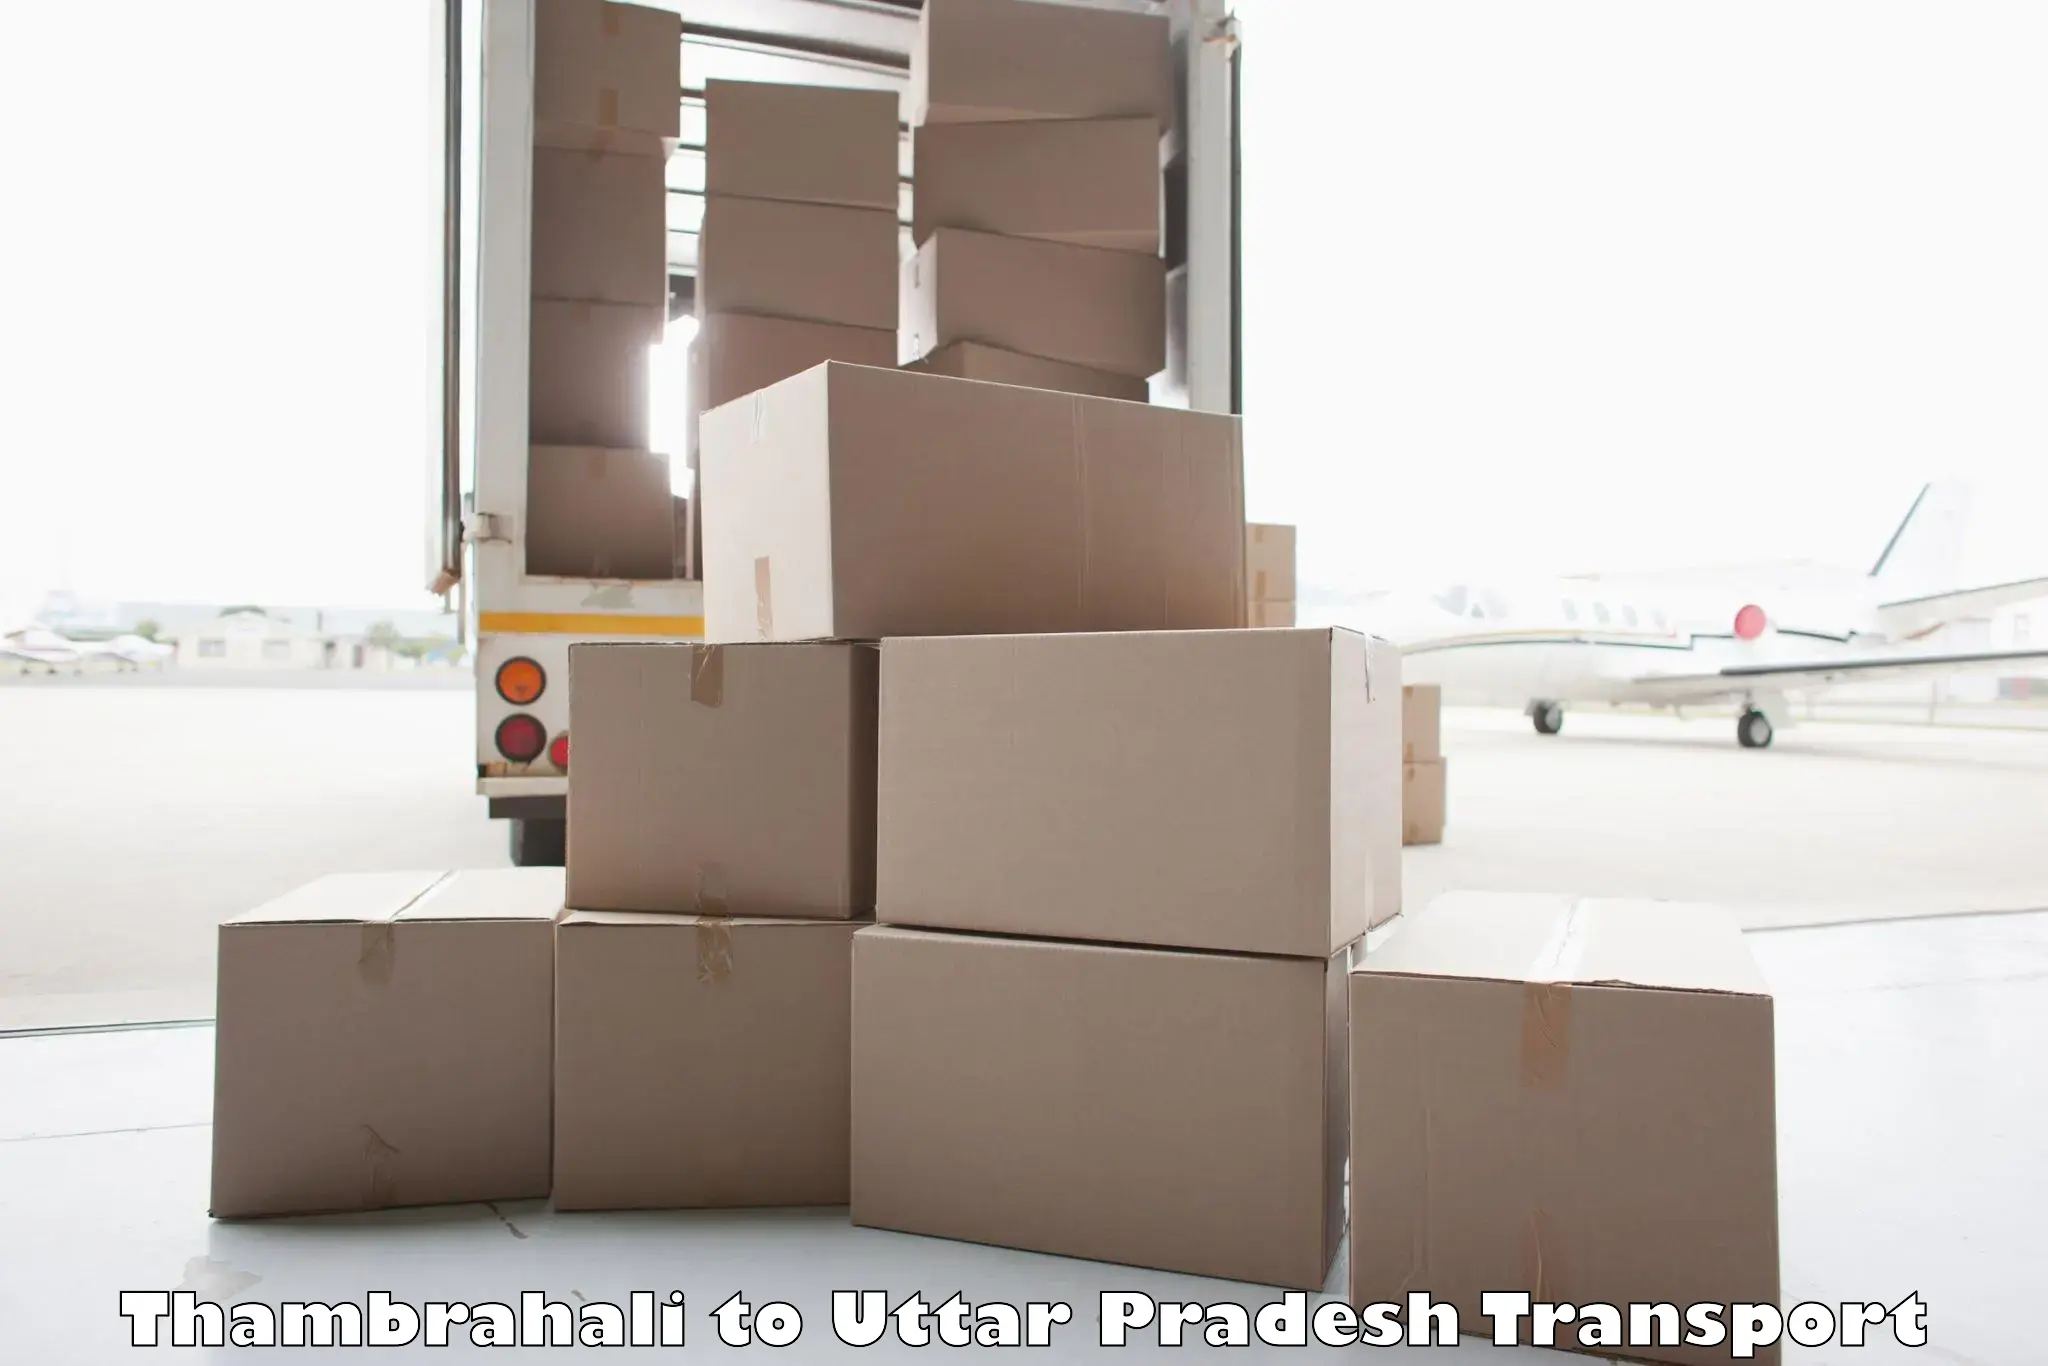 Furniture transport service Thambrahali to King Georges Medical University Lucknow